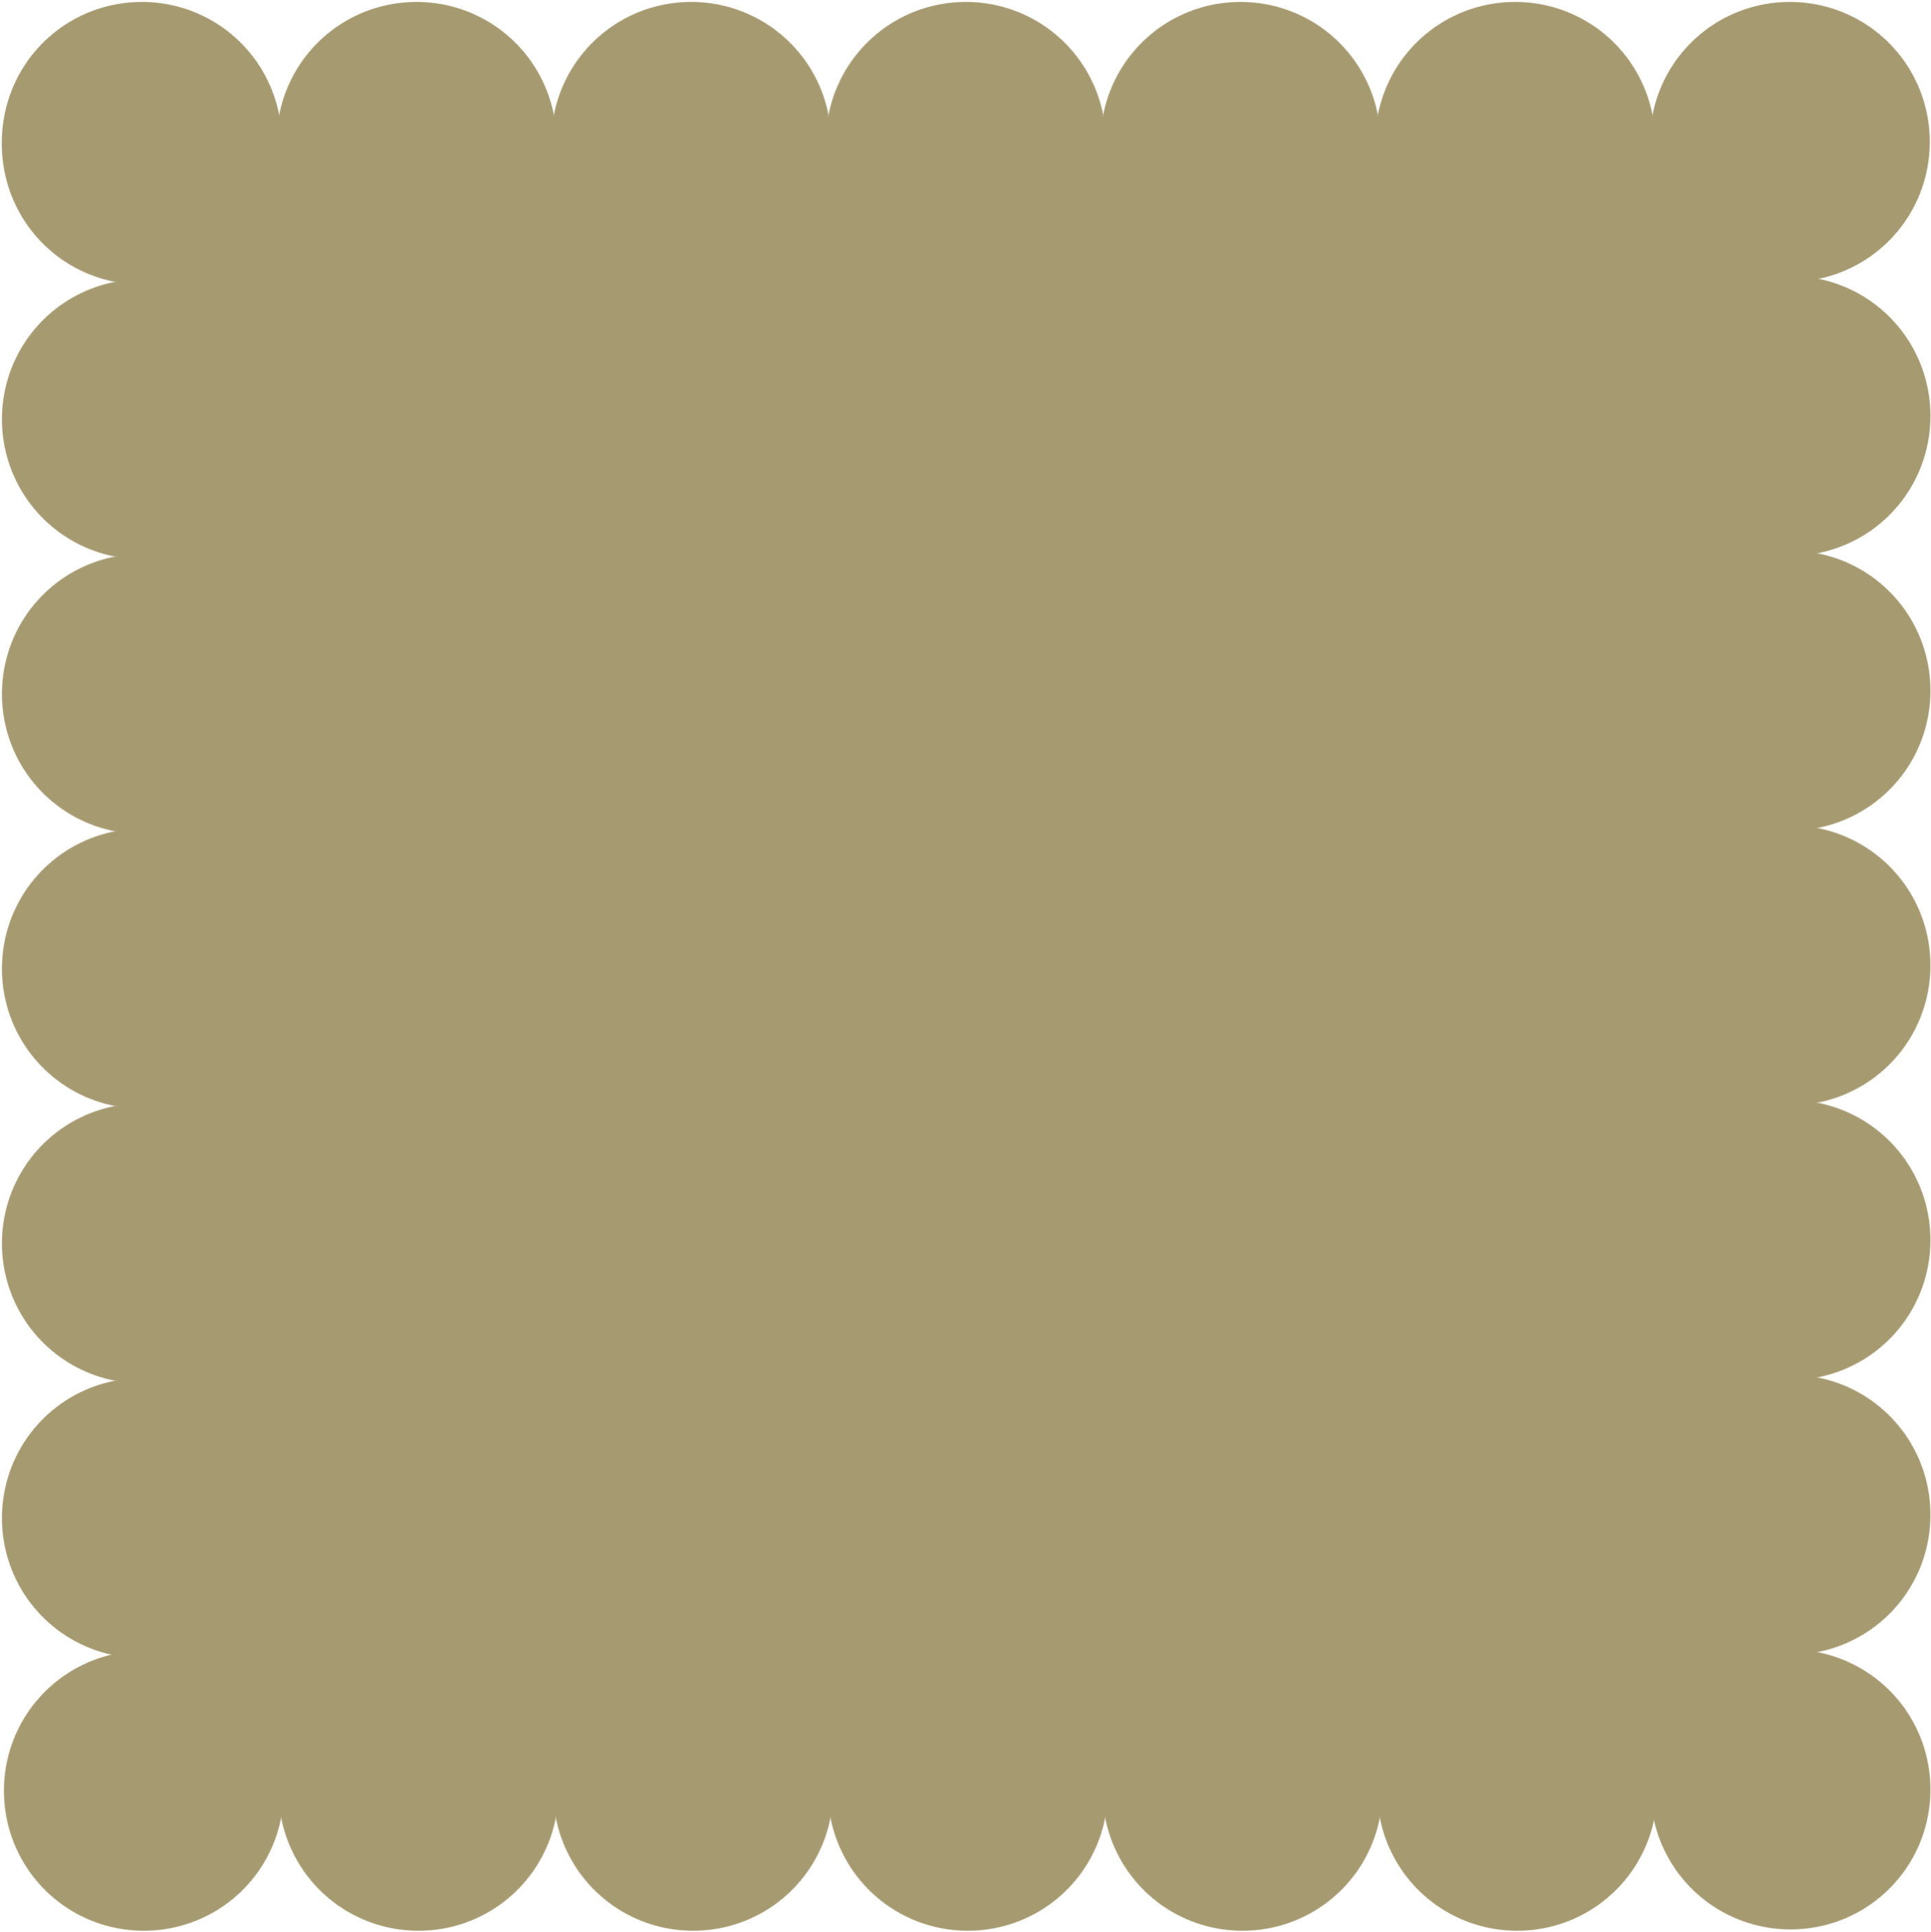 A Square With A Black Border